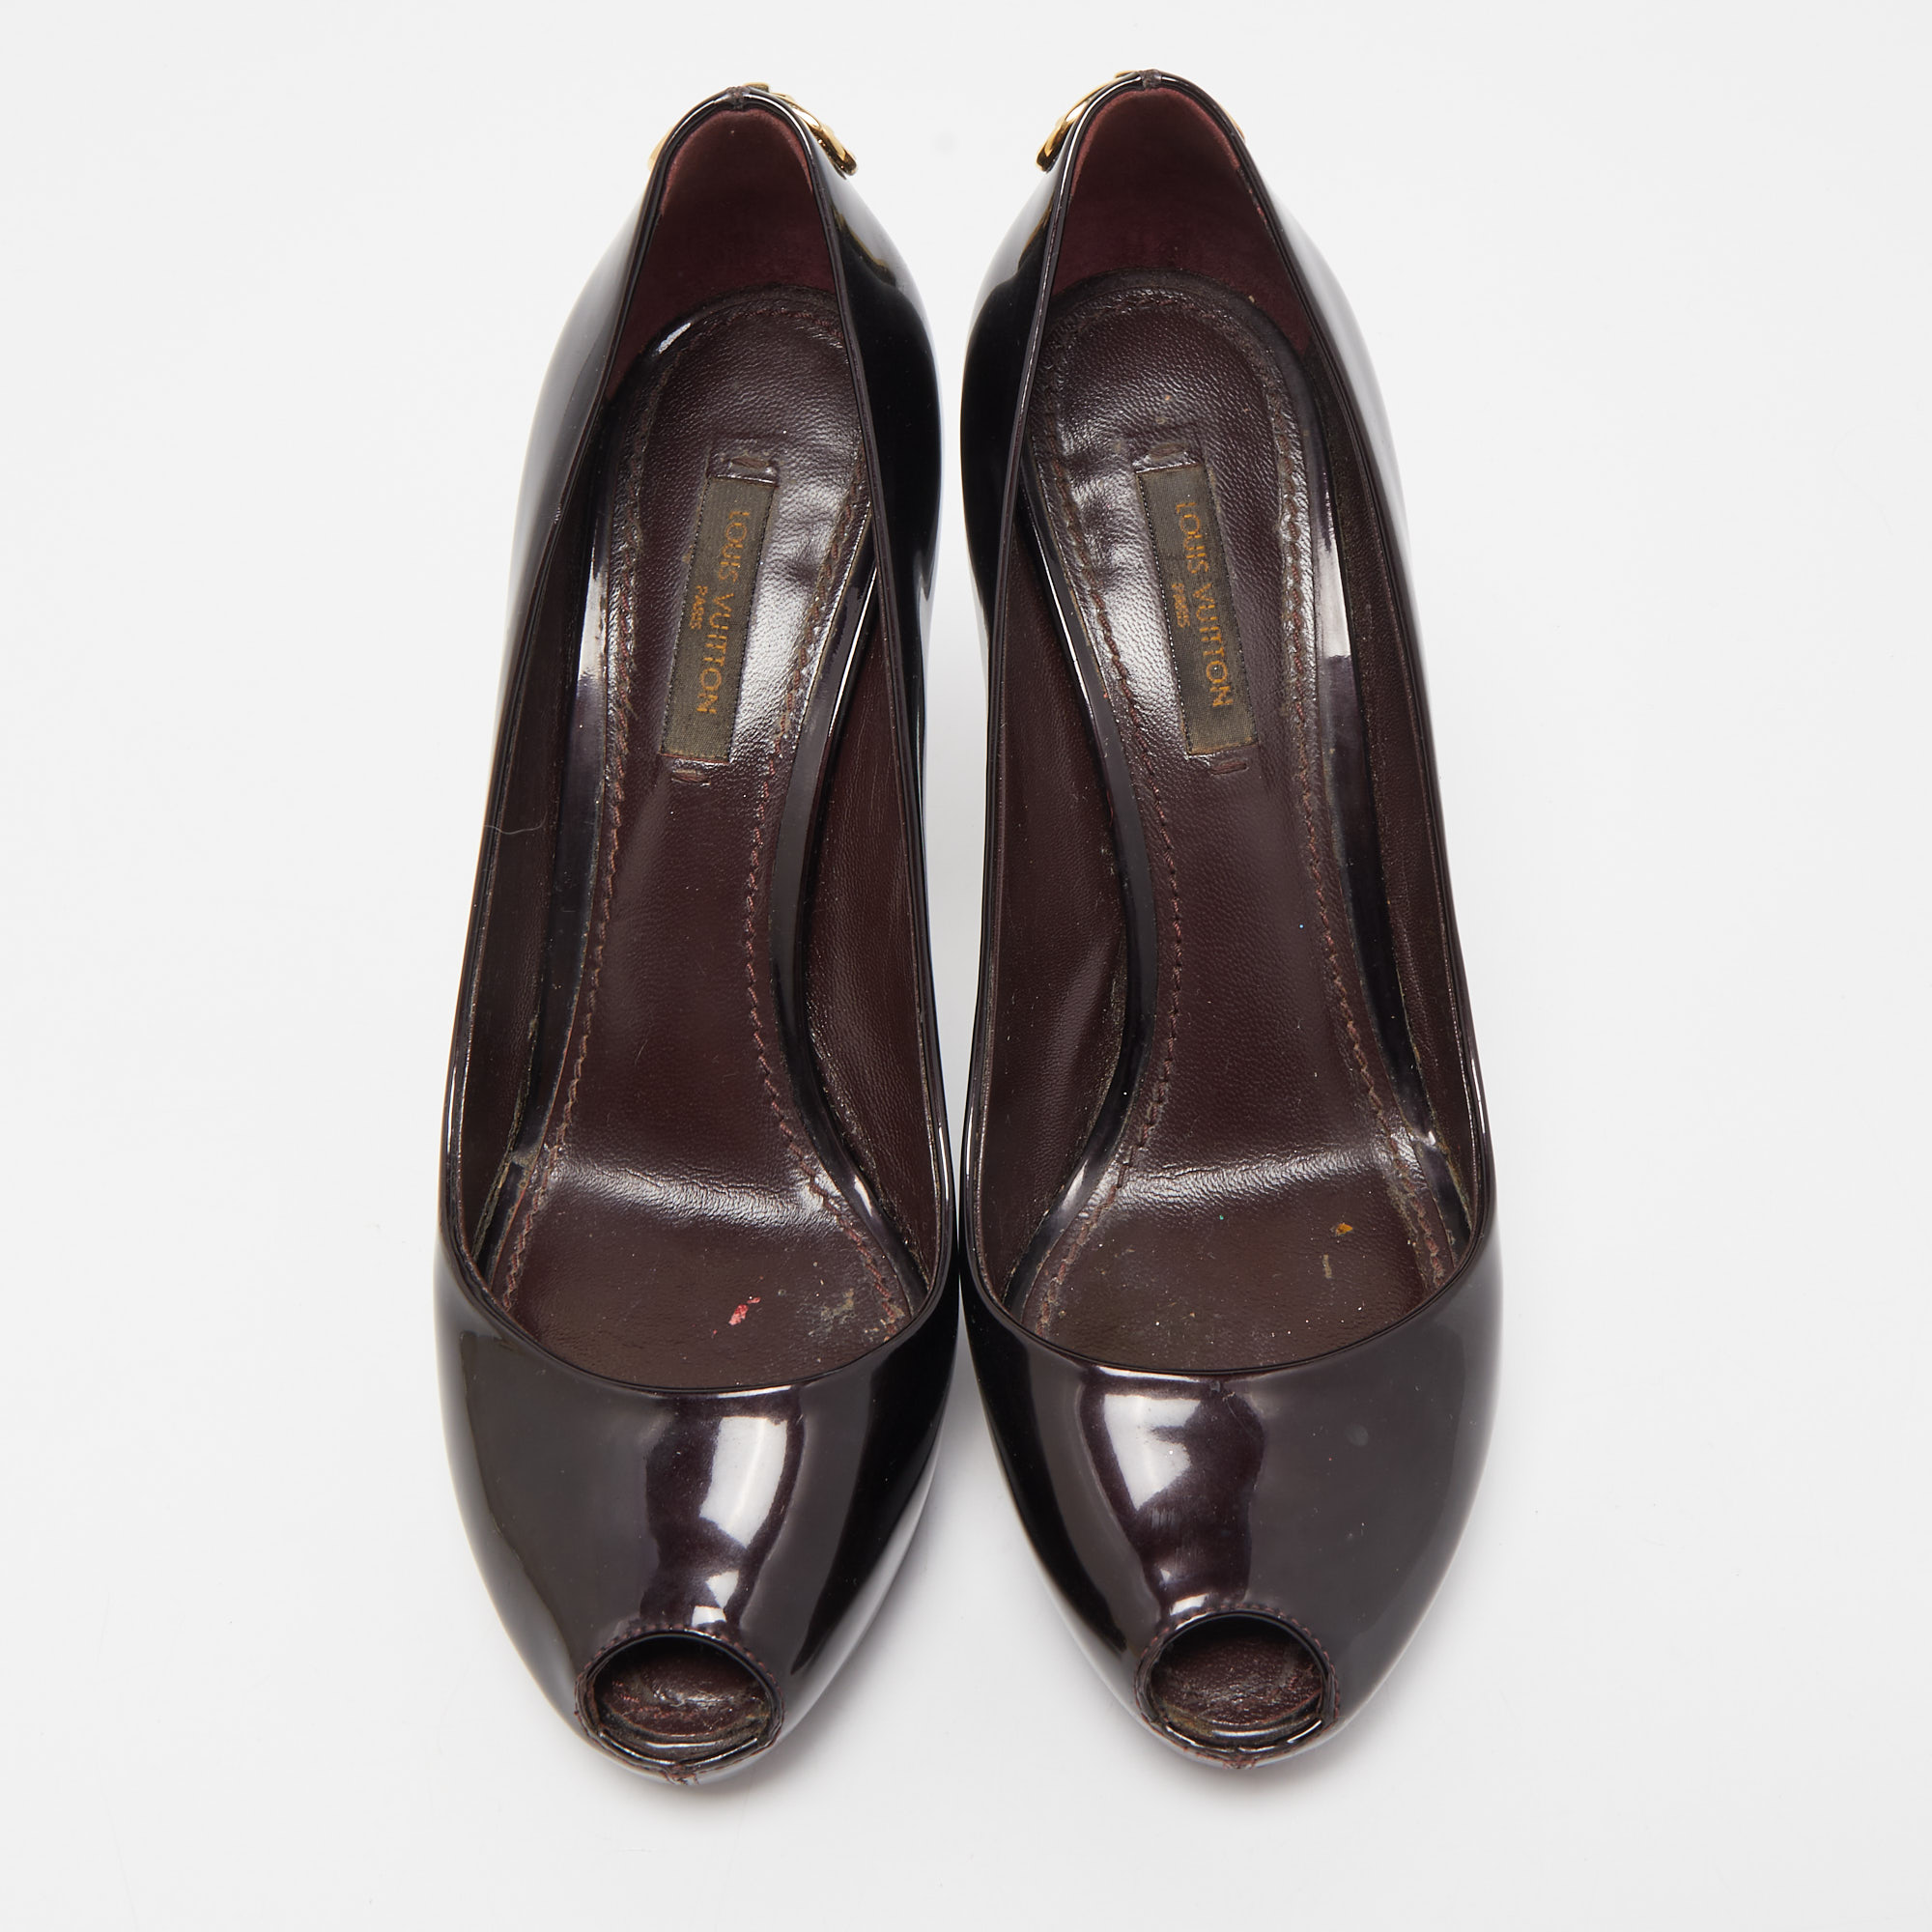 Louis Vuitton Dark Burgundy Patent Leather Oh Really! Pumps Size 36